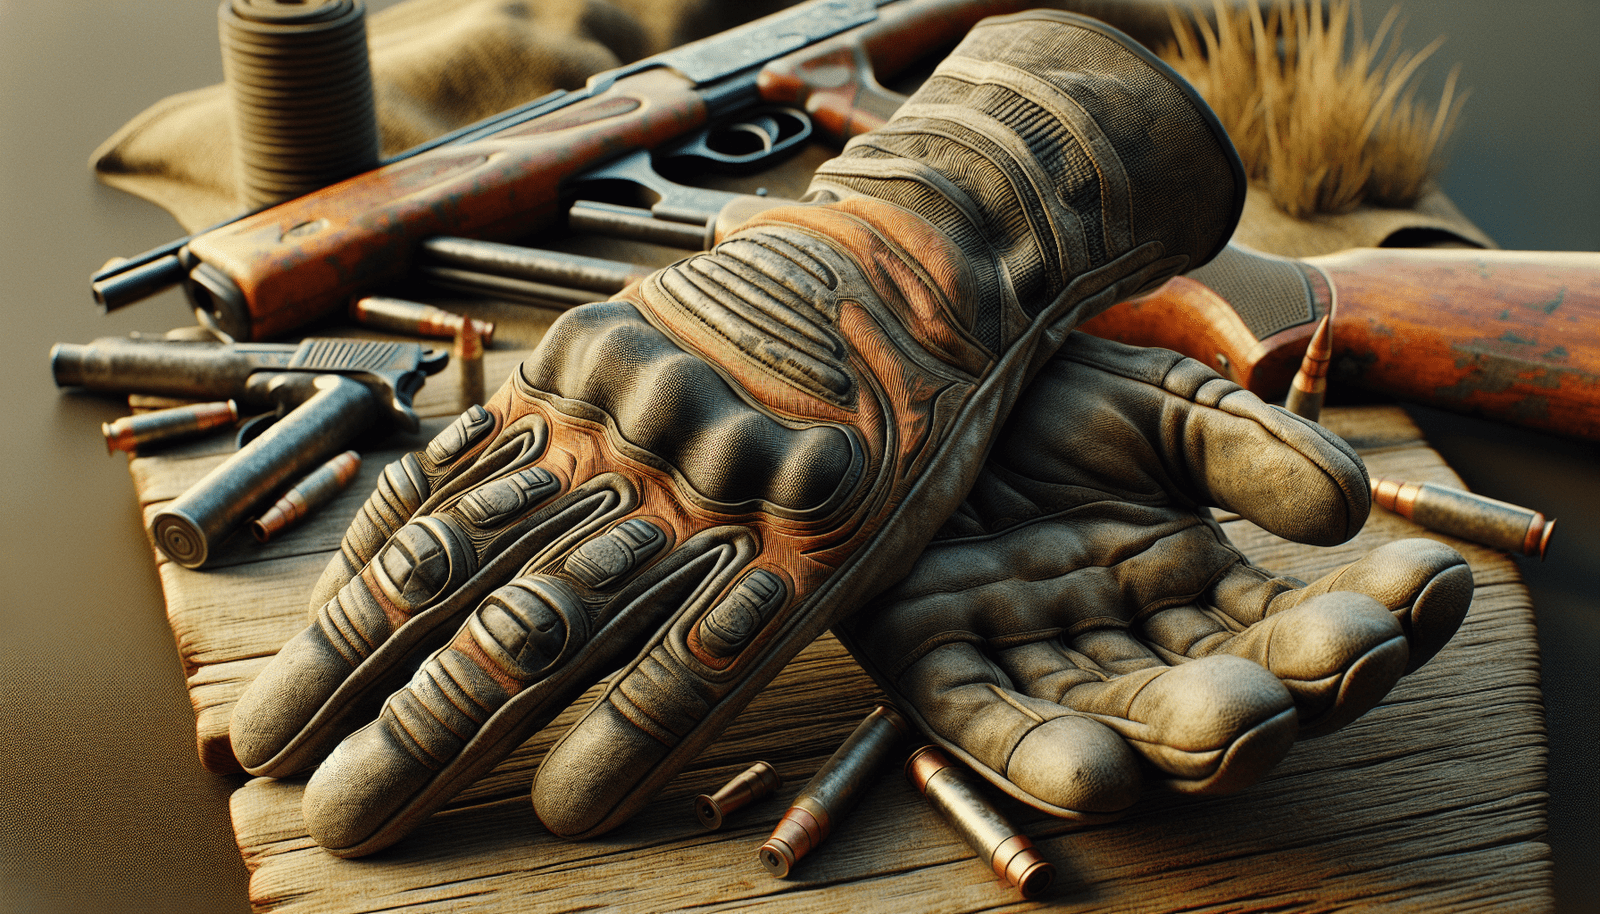 Best Shooting Gloves For Grip And Comfort In Various Shooting Environments